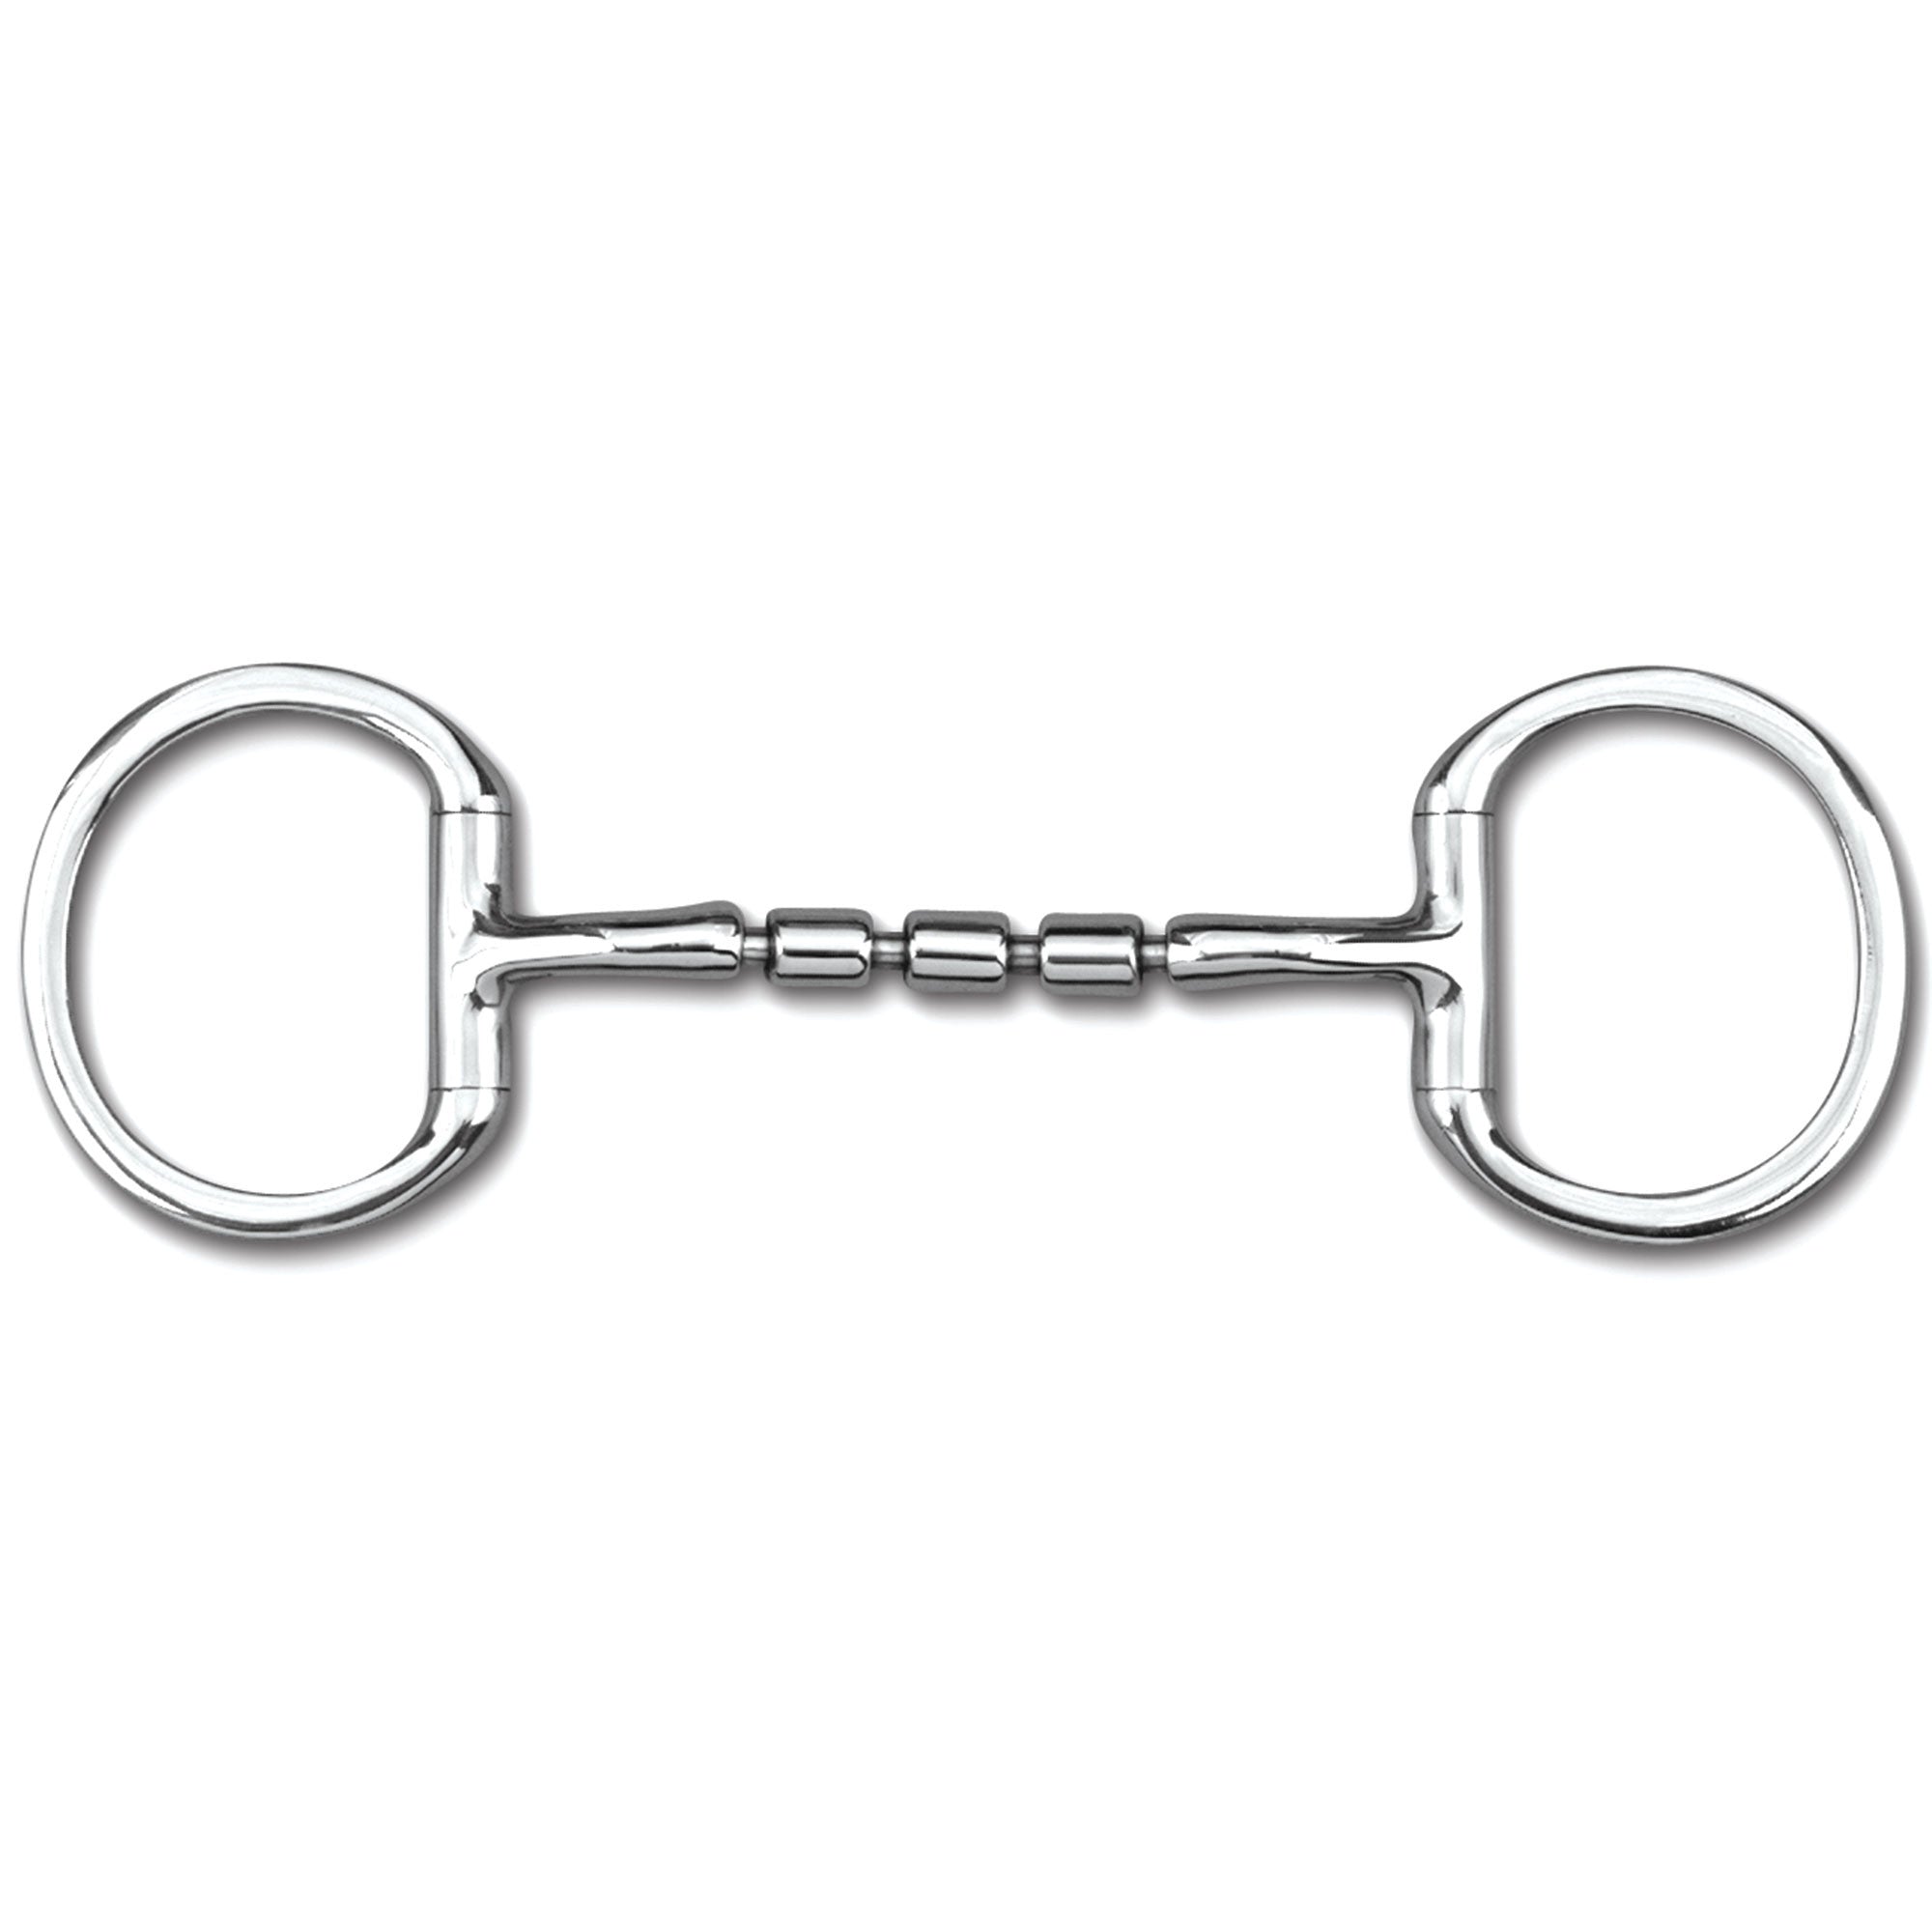 Myler Eggbutt with Stainless Steel Mullen Triple Barrel MB 32-3 - The Tack Shop of Lexington